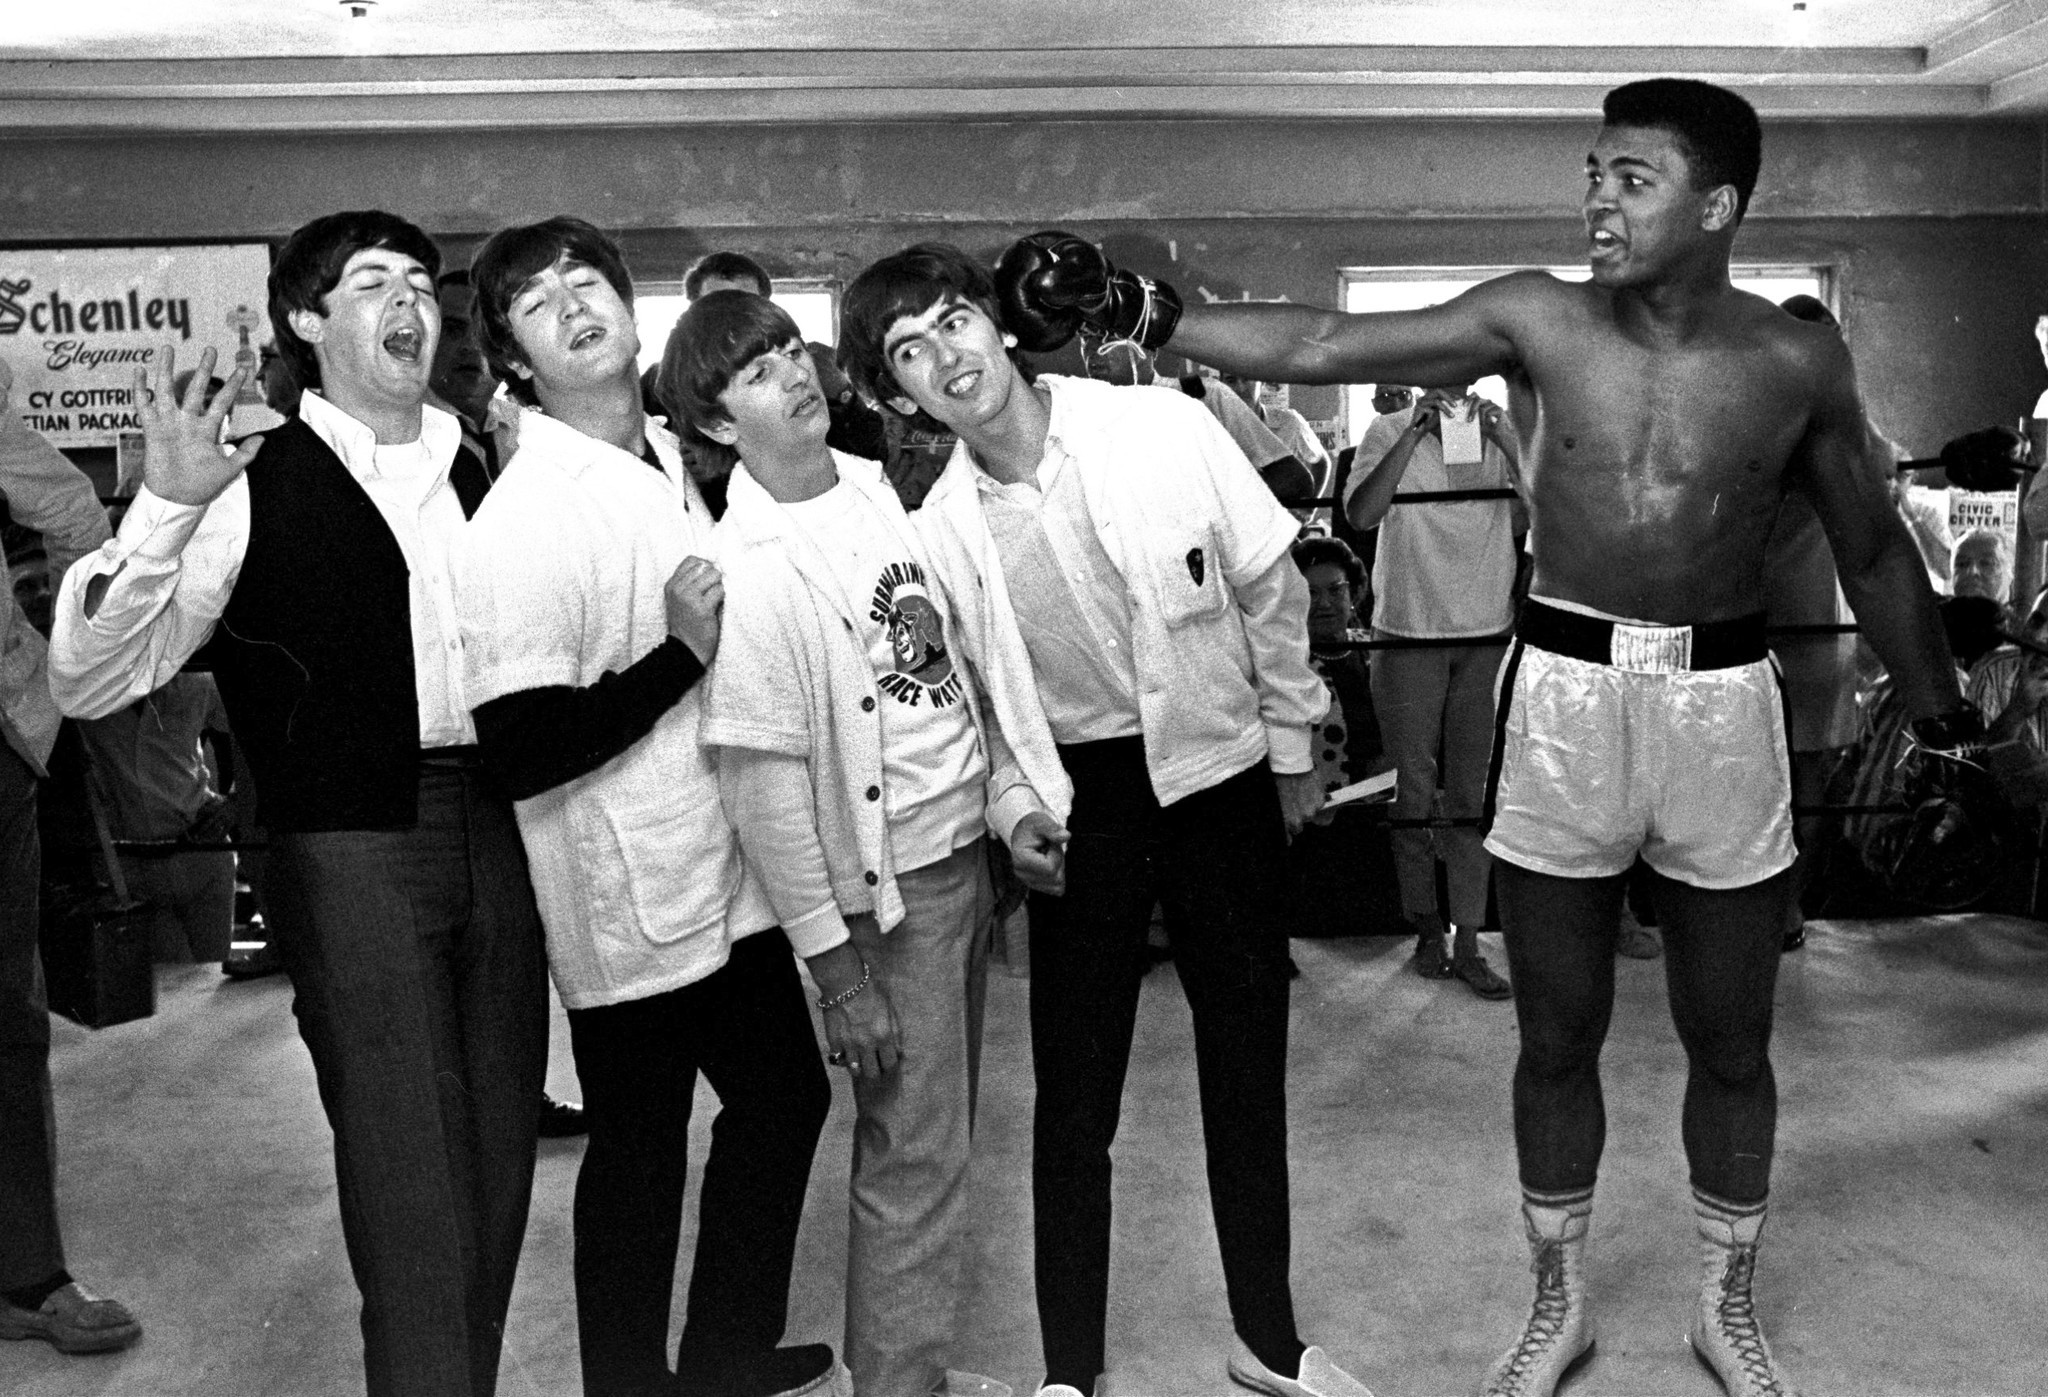 Paul McCartney, John Lennon, Ringo Starr, and George Harrison of The Beatles take a fake blow from Muhammad Ali, at the time known as Cassius Clay, while visiting the heavyweight contender at his training camp in Miami Beach, Fla. on Feb. 17, 1964.